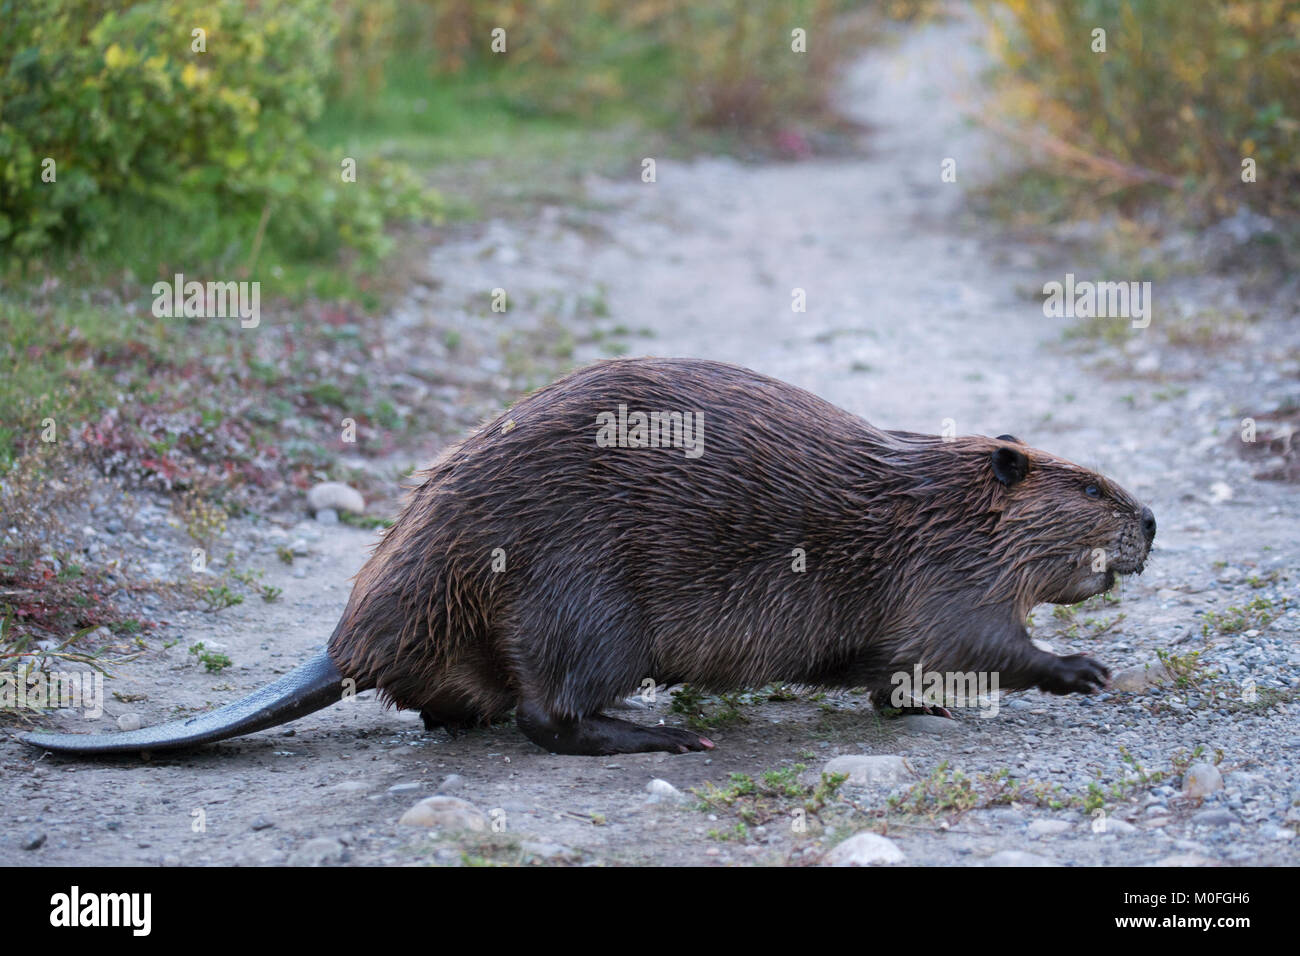 Beaver (Castor canadensis) crossing a trail in a city park Stock Photo